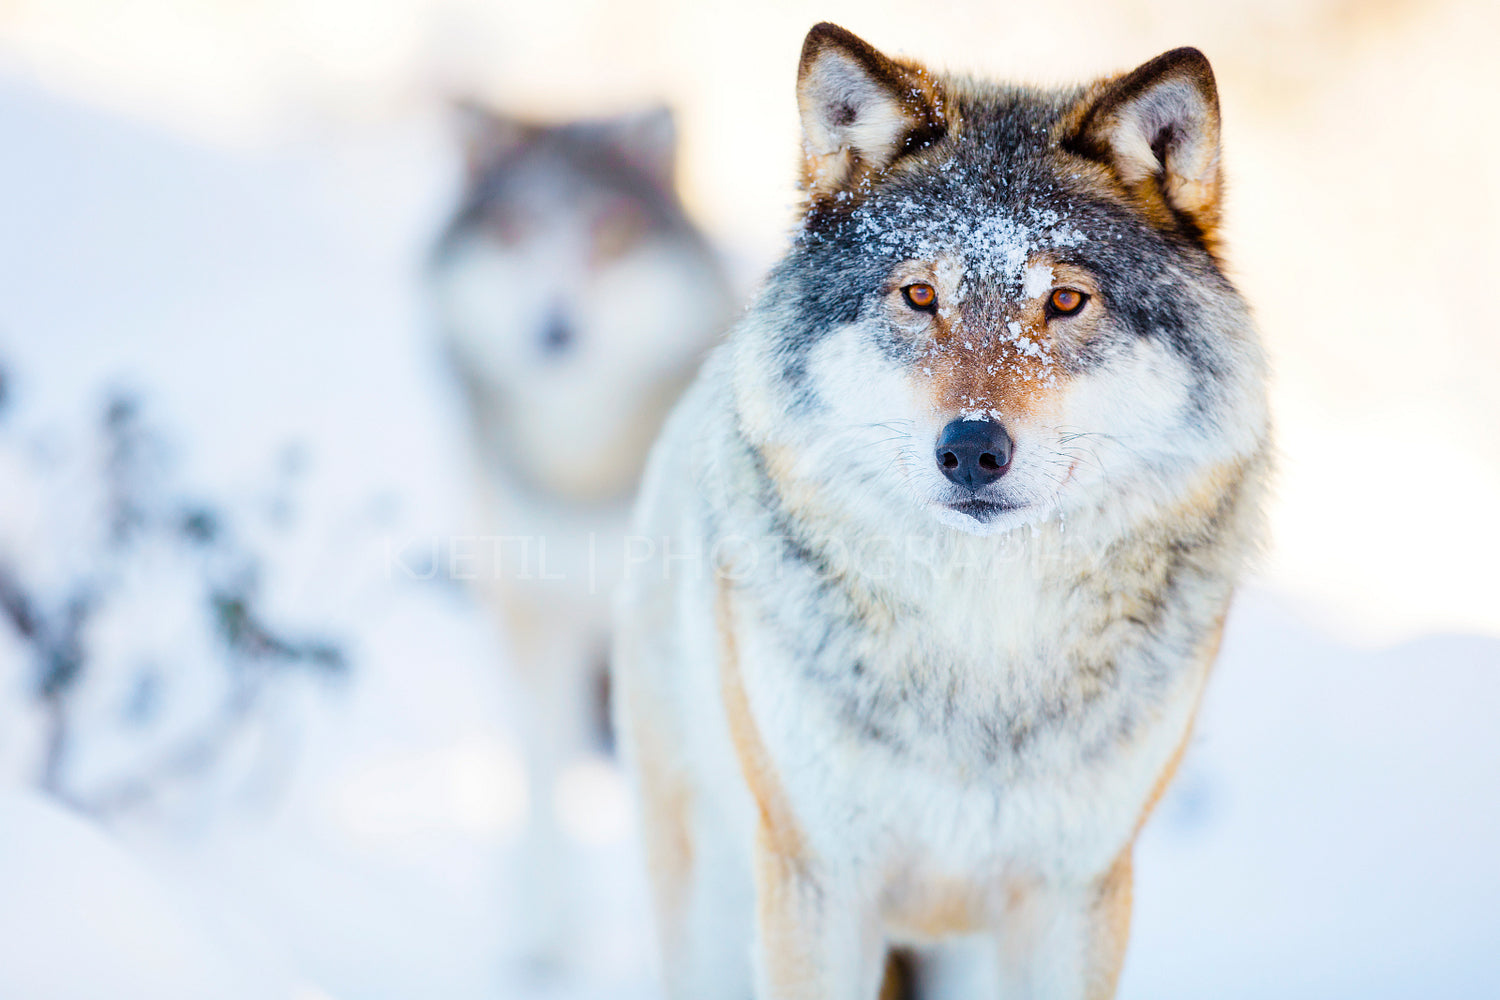 Two wolves in cold winter landscape